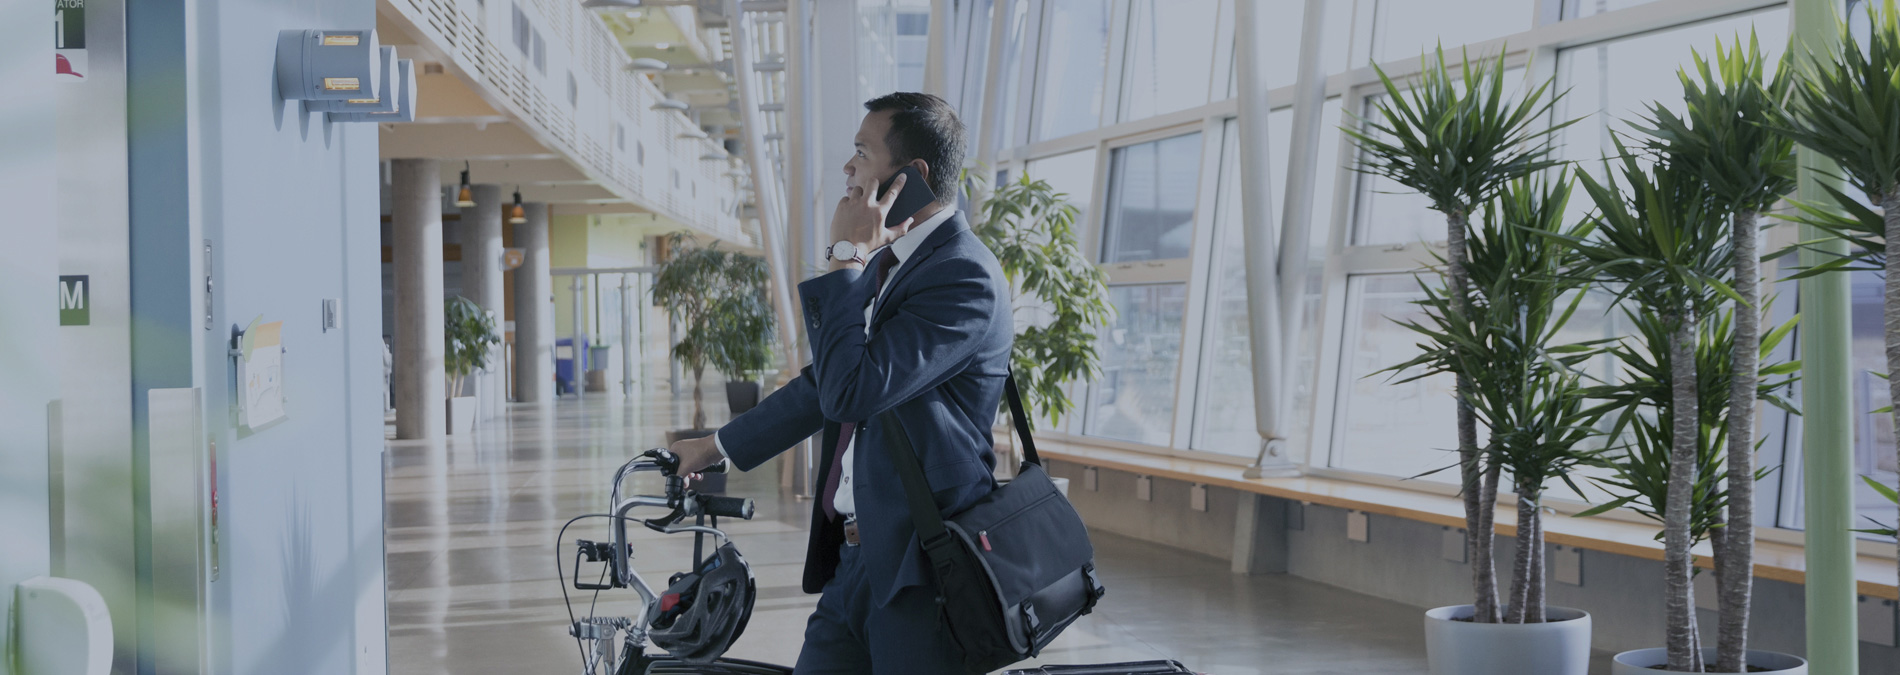 man talking on phone while holding bicycle 